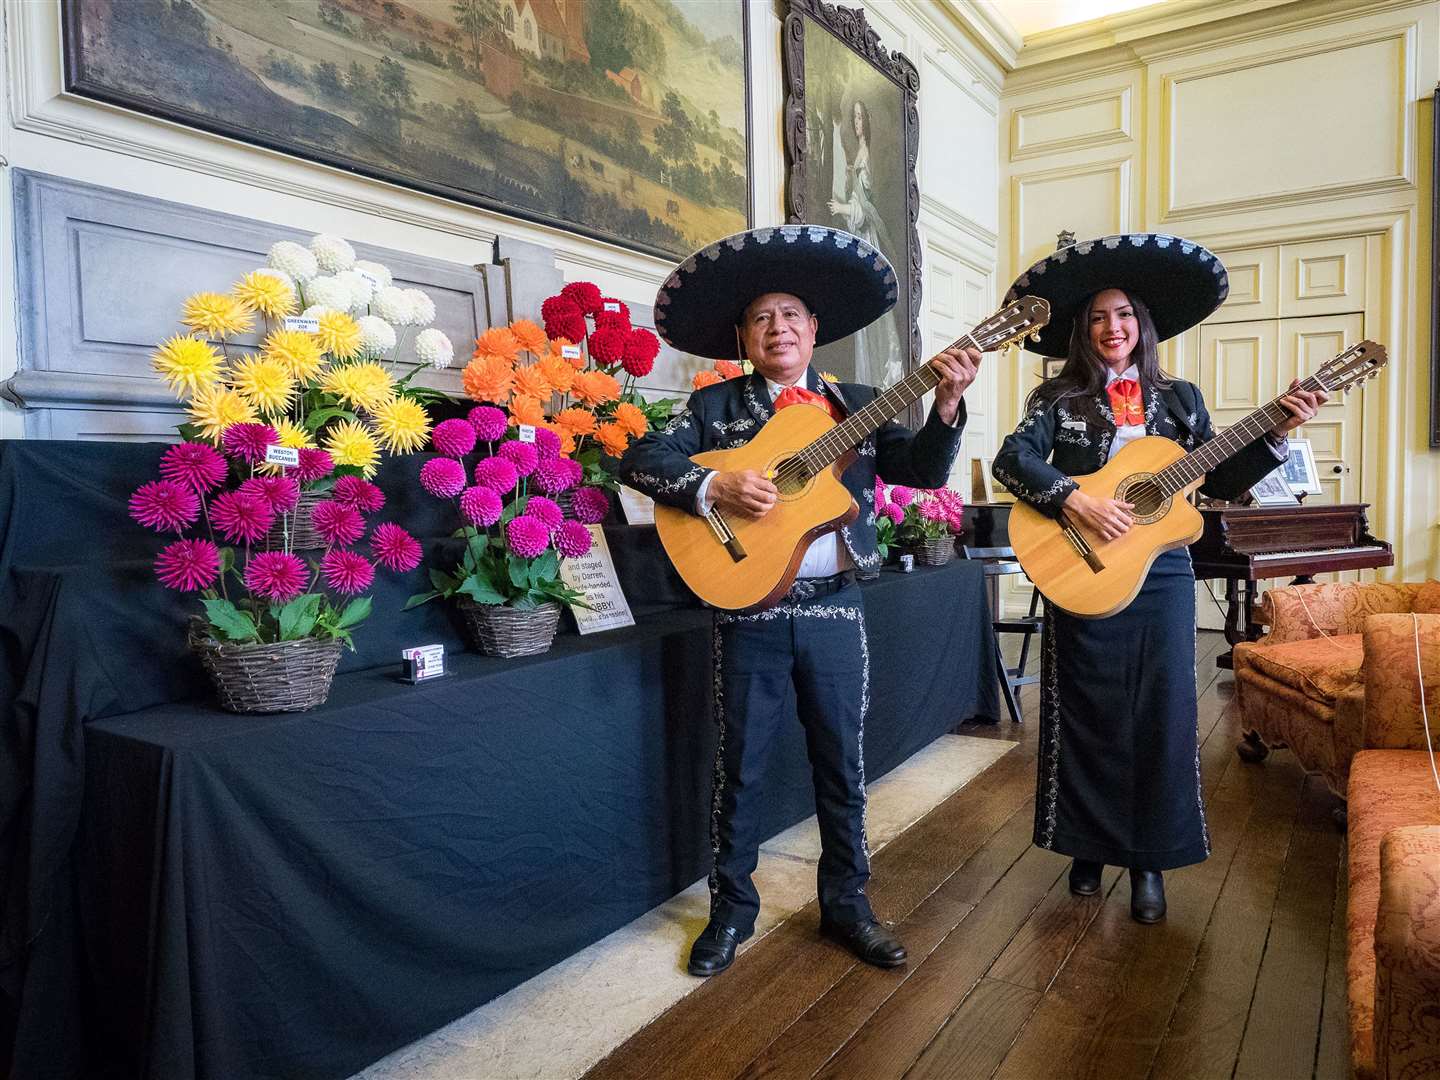 Mexican music and food will filter through Lullingstone Castle this weekend